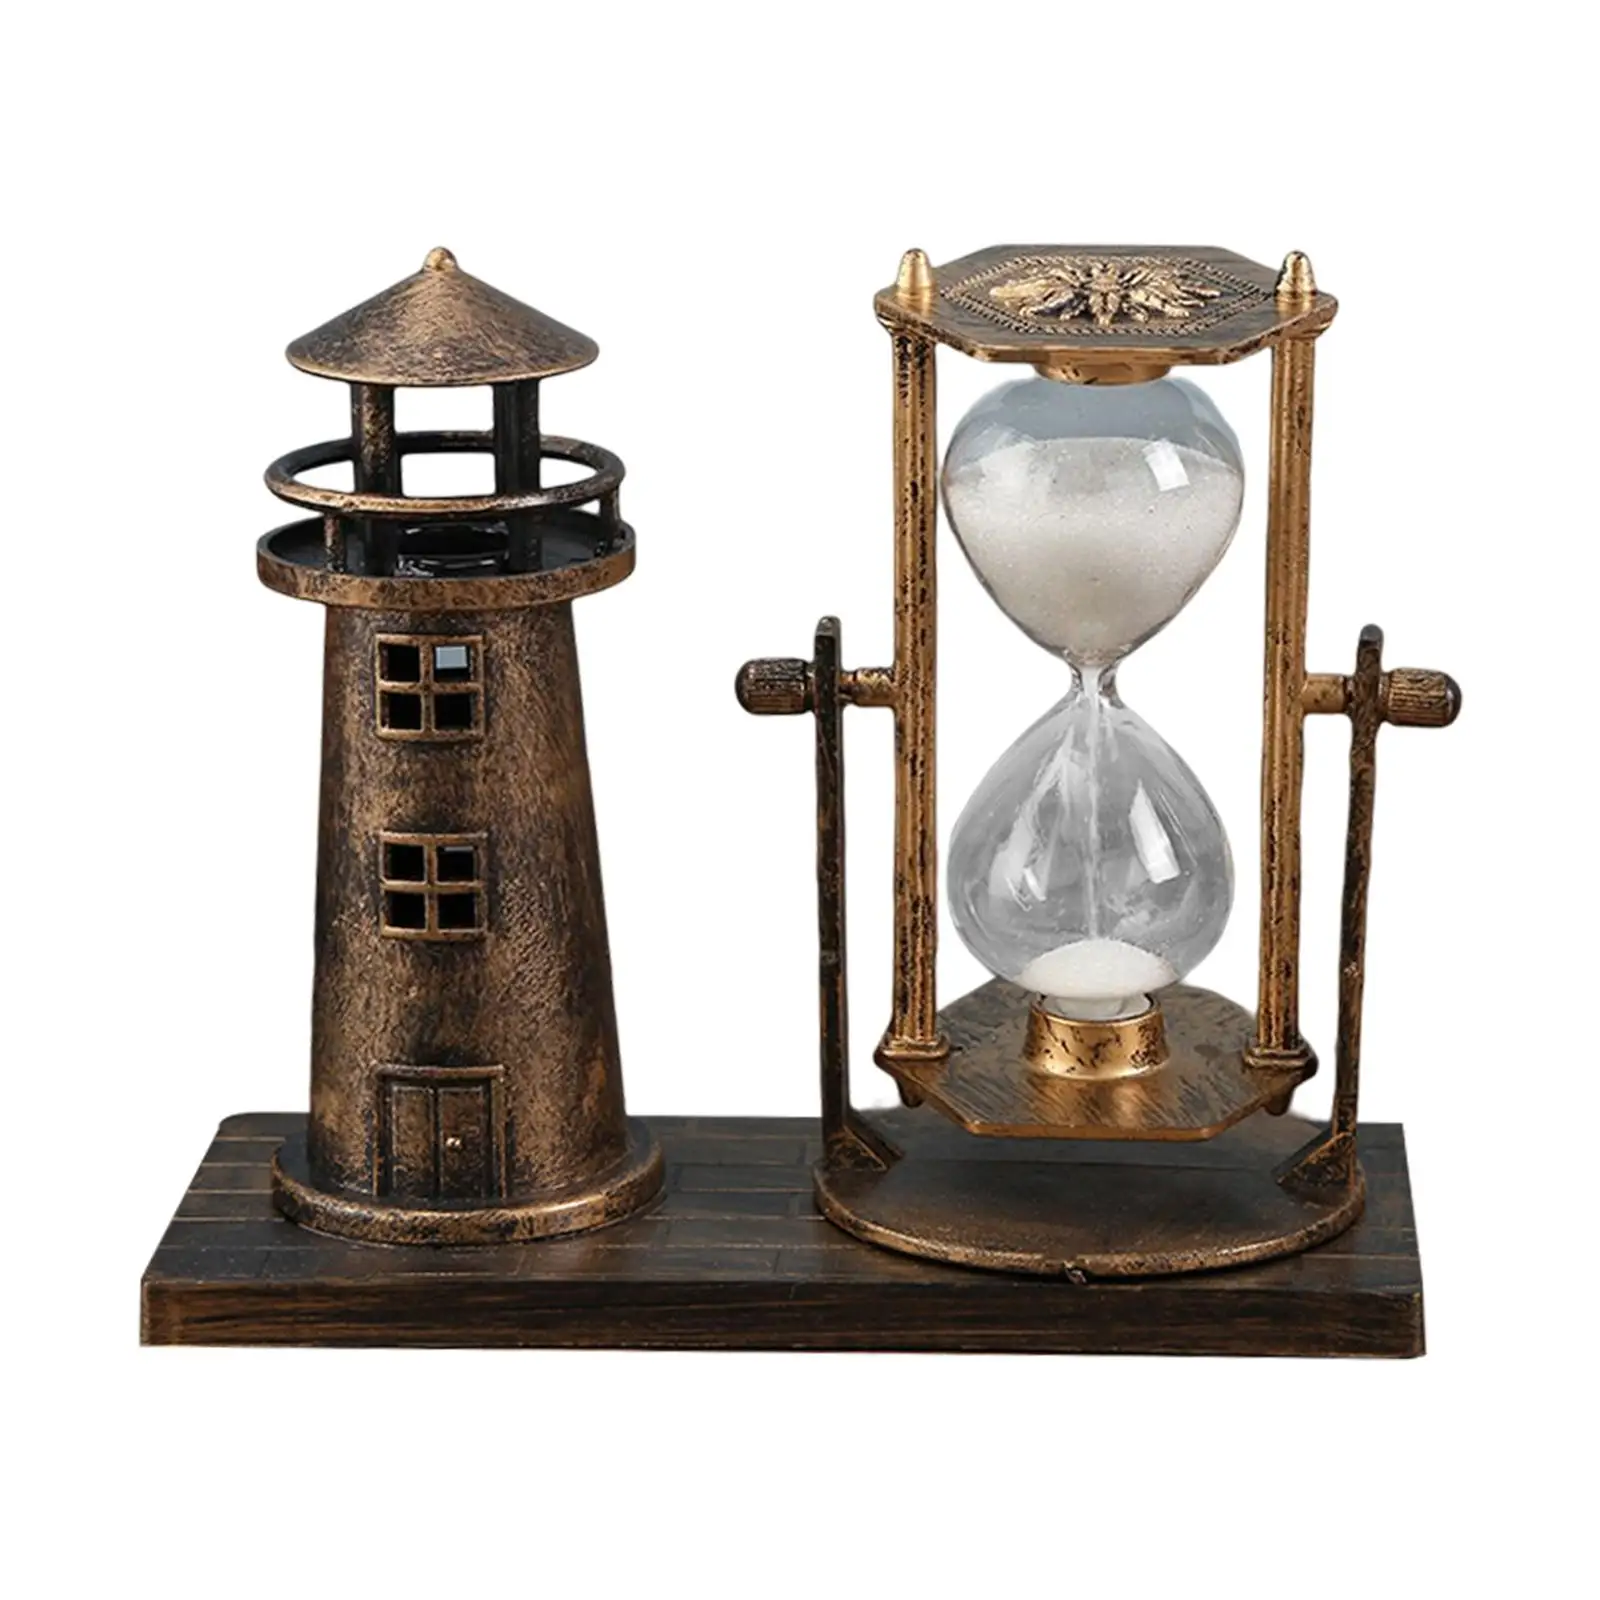 Retro Style Lighthouse Hourglass Sand Timer Decorations Statue Centerpiece Ornaments for School Tabletop Office New Year Gift